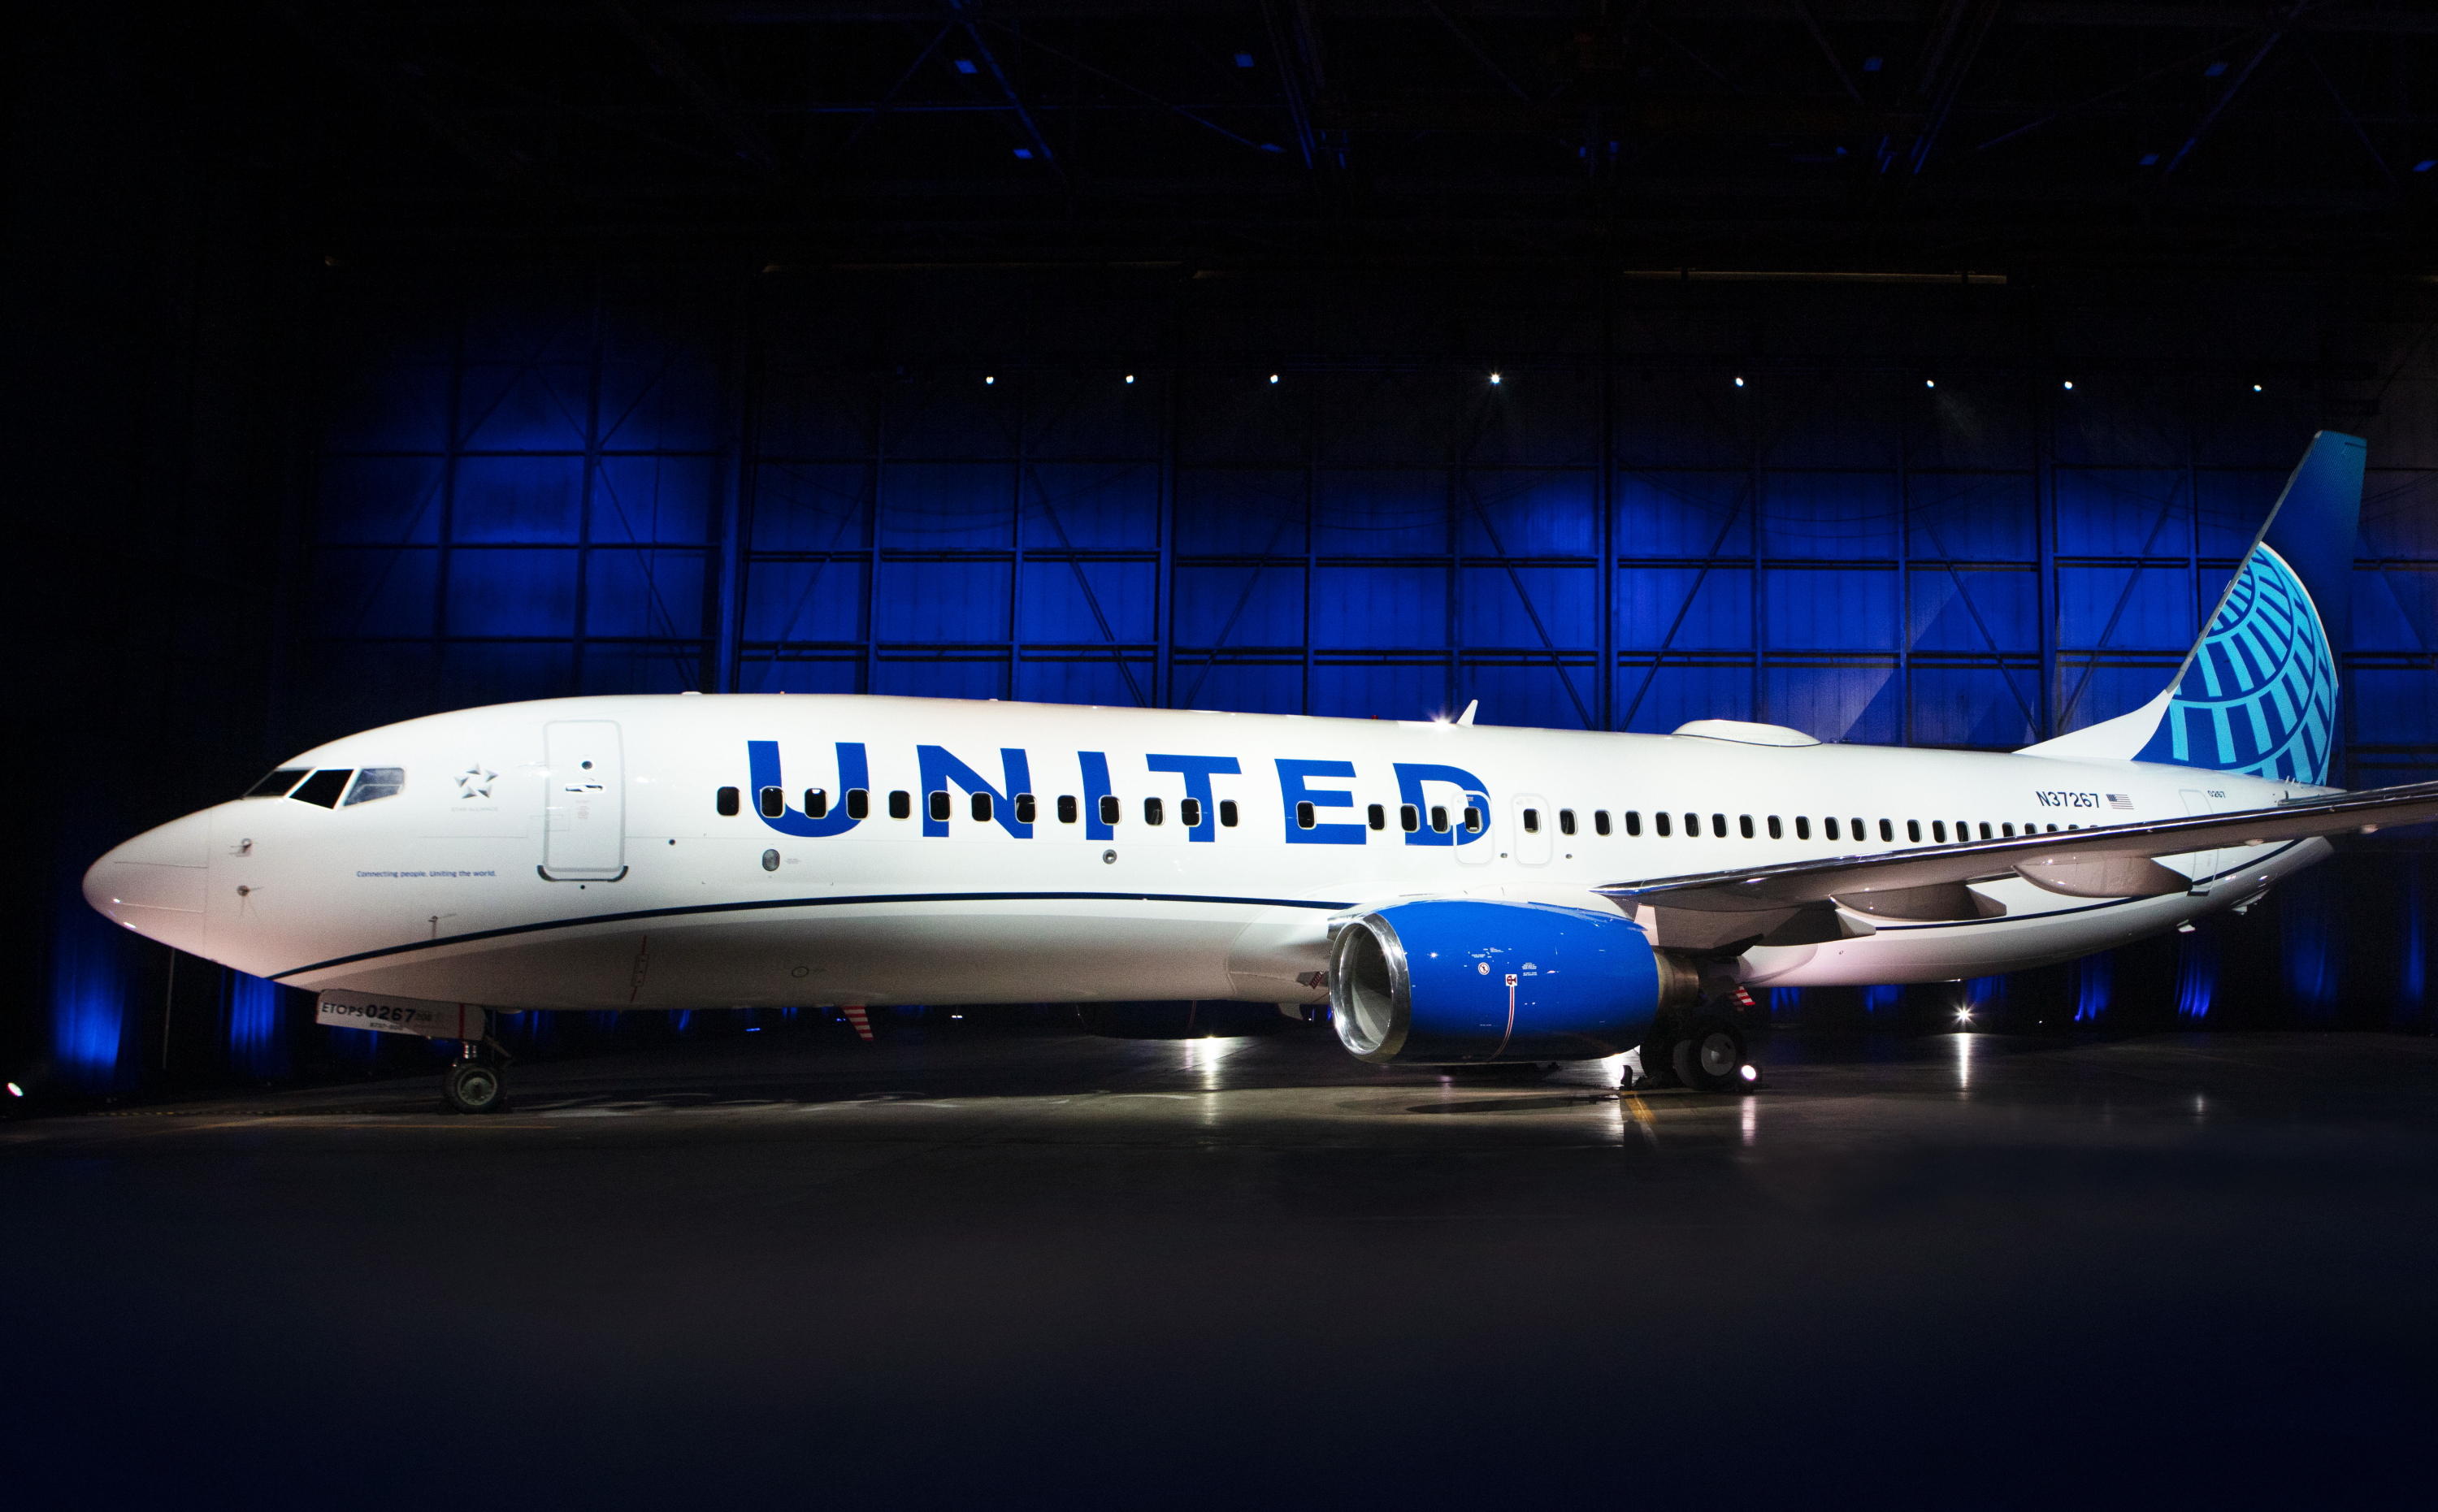 United Airlines has unveiled its new aircraft livery. The first aircraft painted with the new design is a Boeing 737-800, which will be joined by a mix of narrowbody, widebody and regional aircraft with the new livery throughout the year. On average, United aircraft receive new paint jobs every seven years. Click to enlarge.